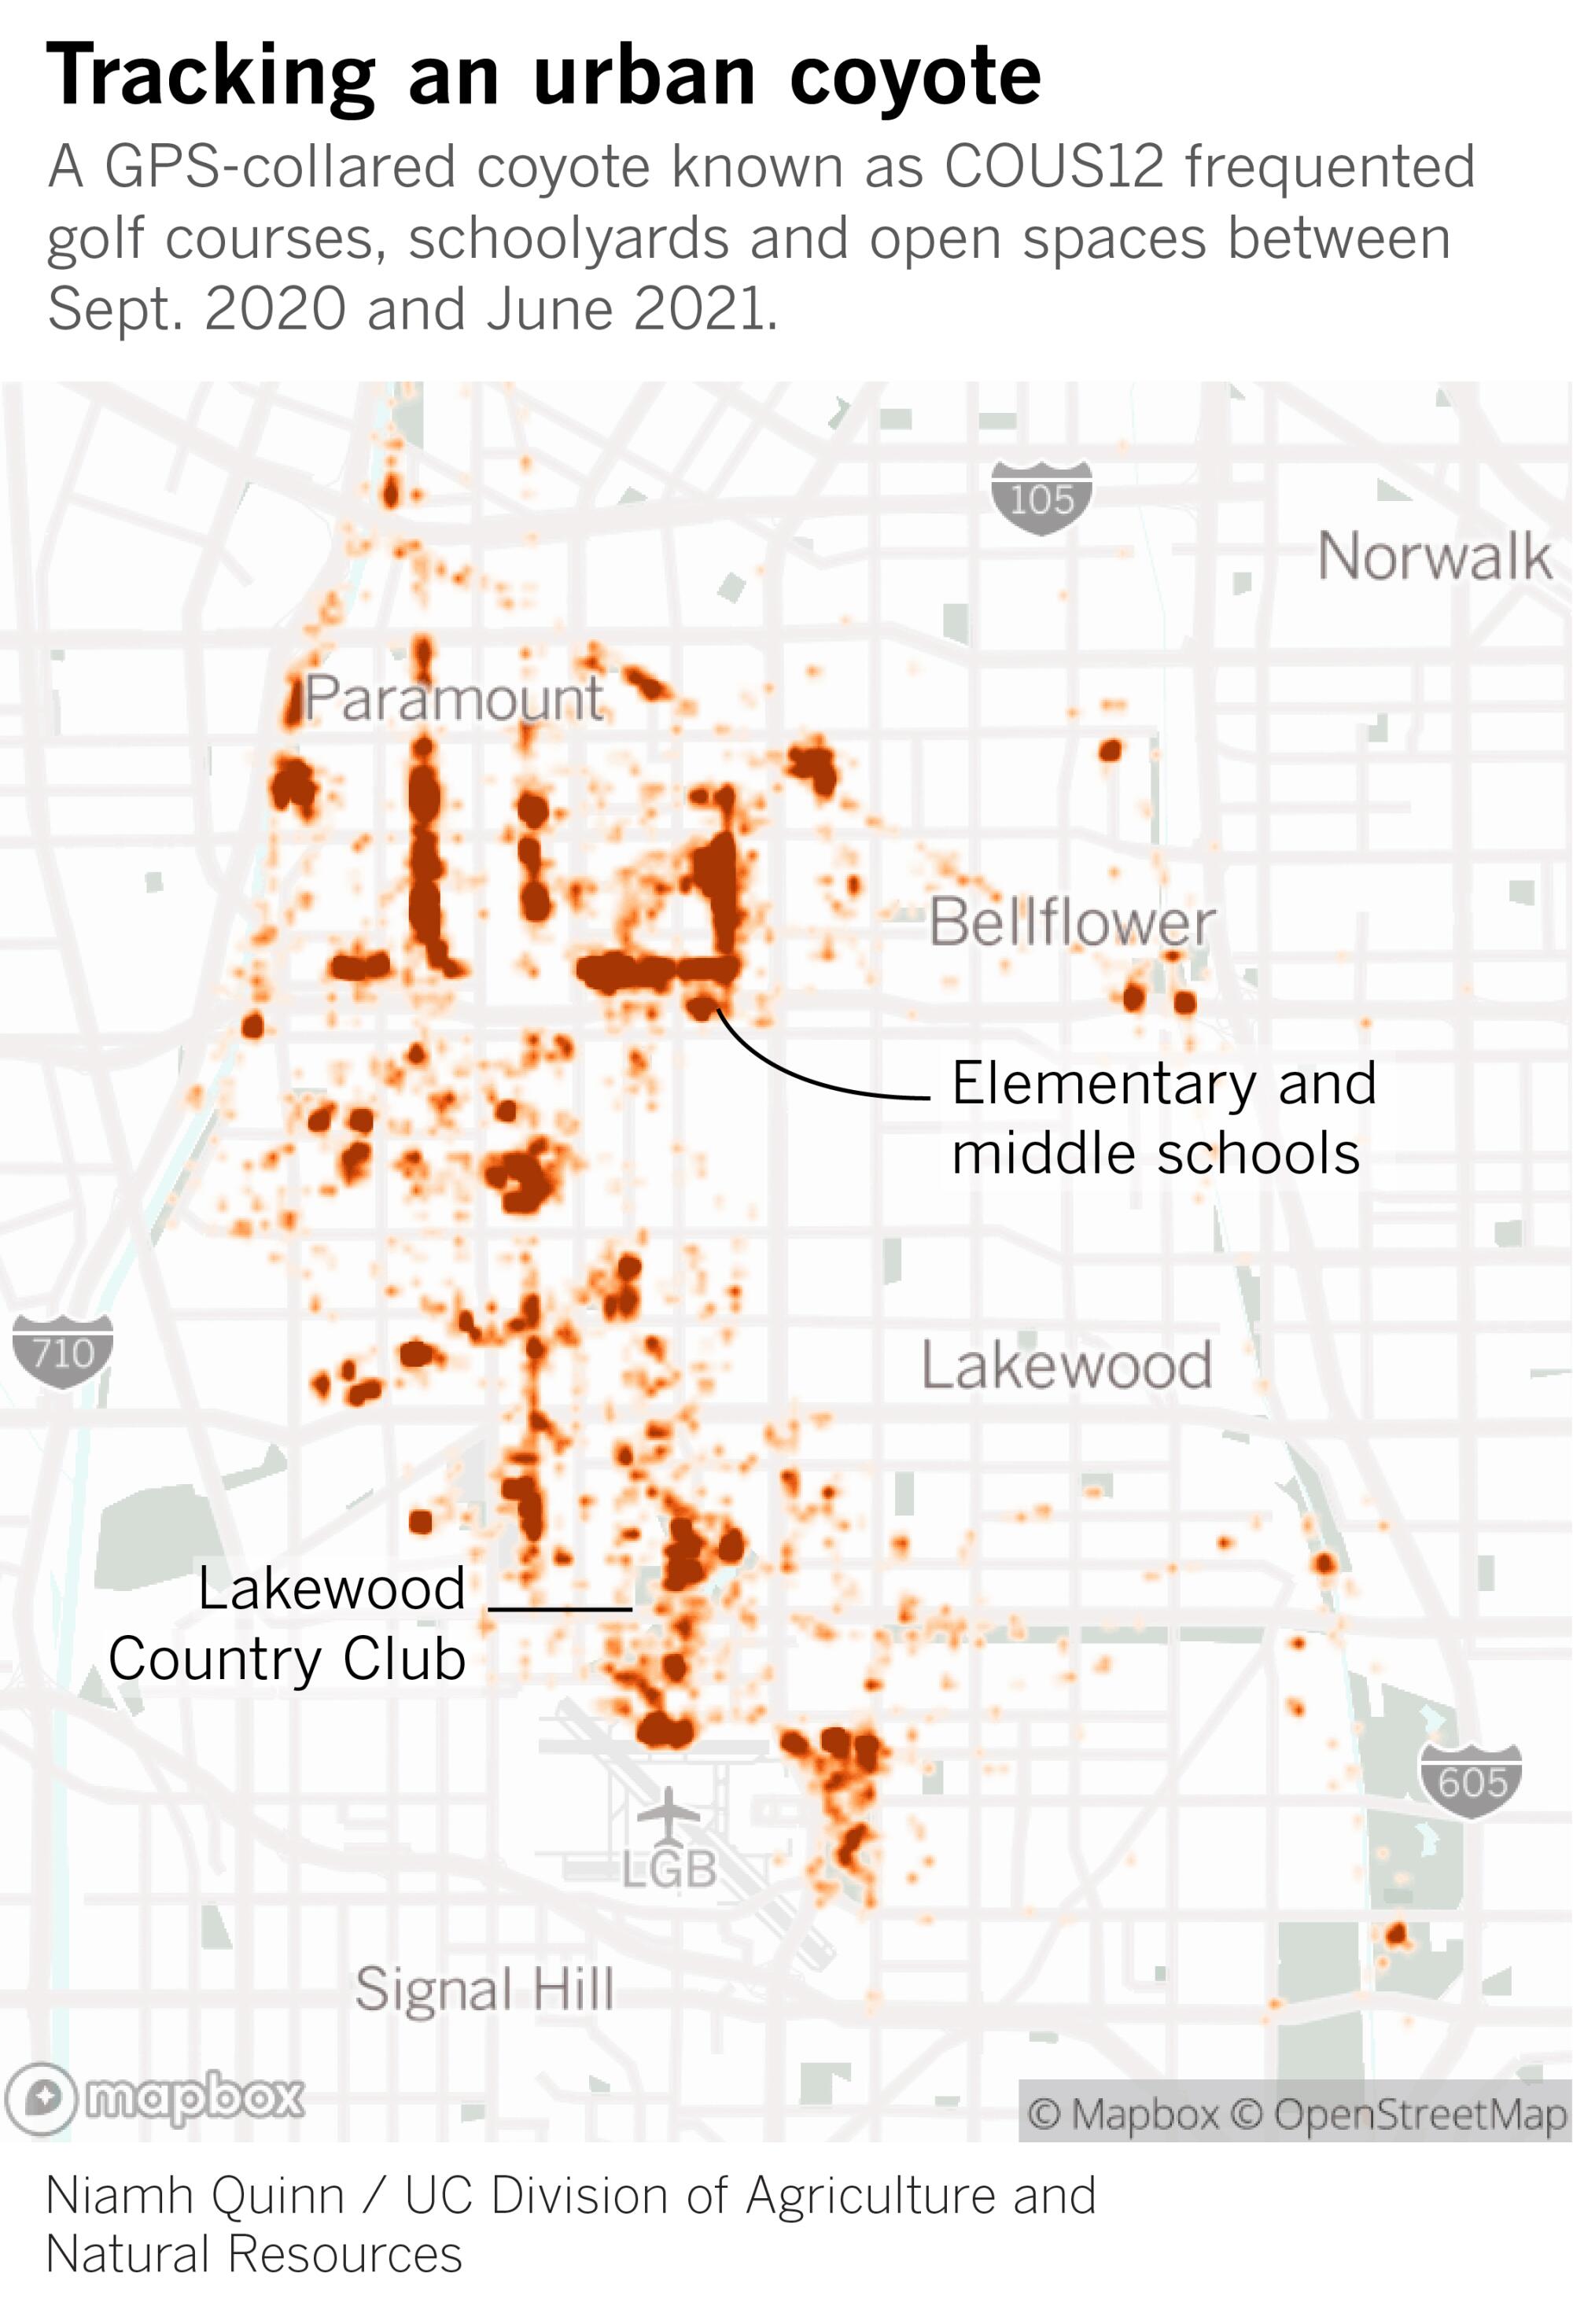 A map shows a GPS-collared coyote frequented golf courses, schoolyards and open spaces near Lakewood.